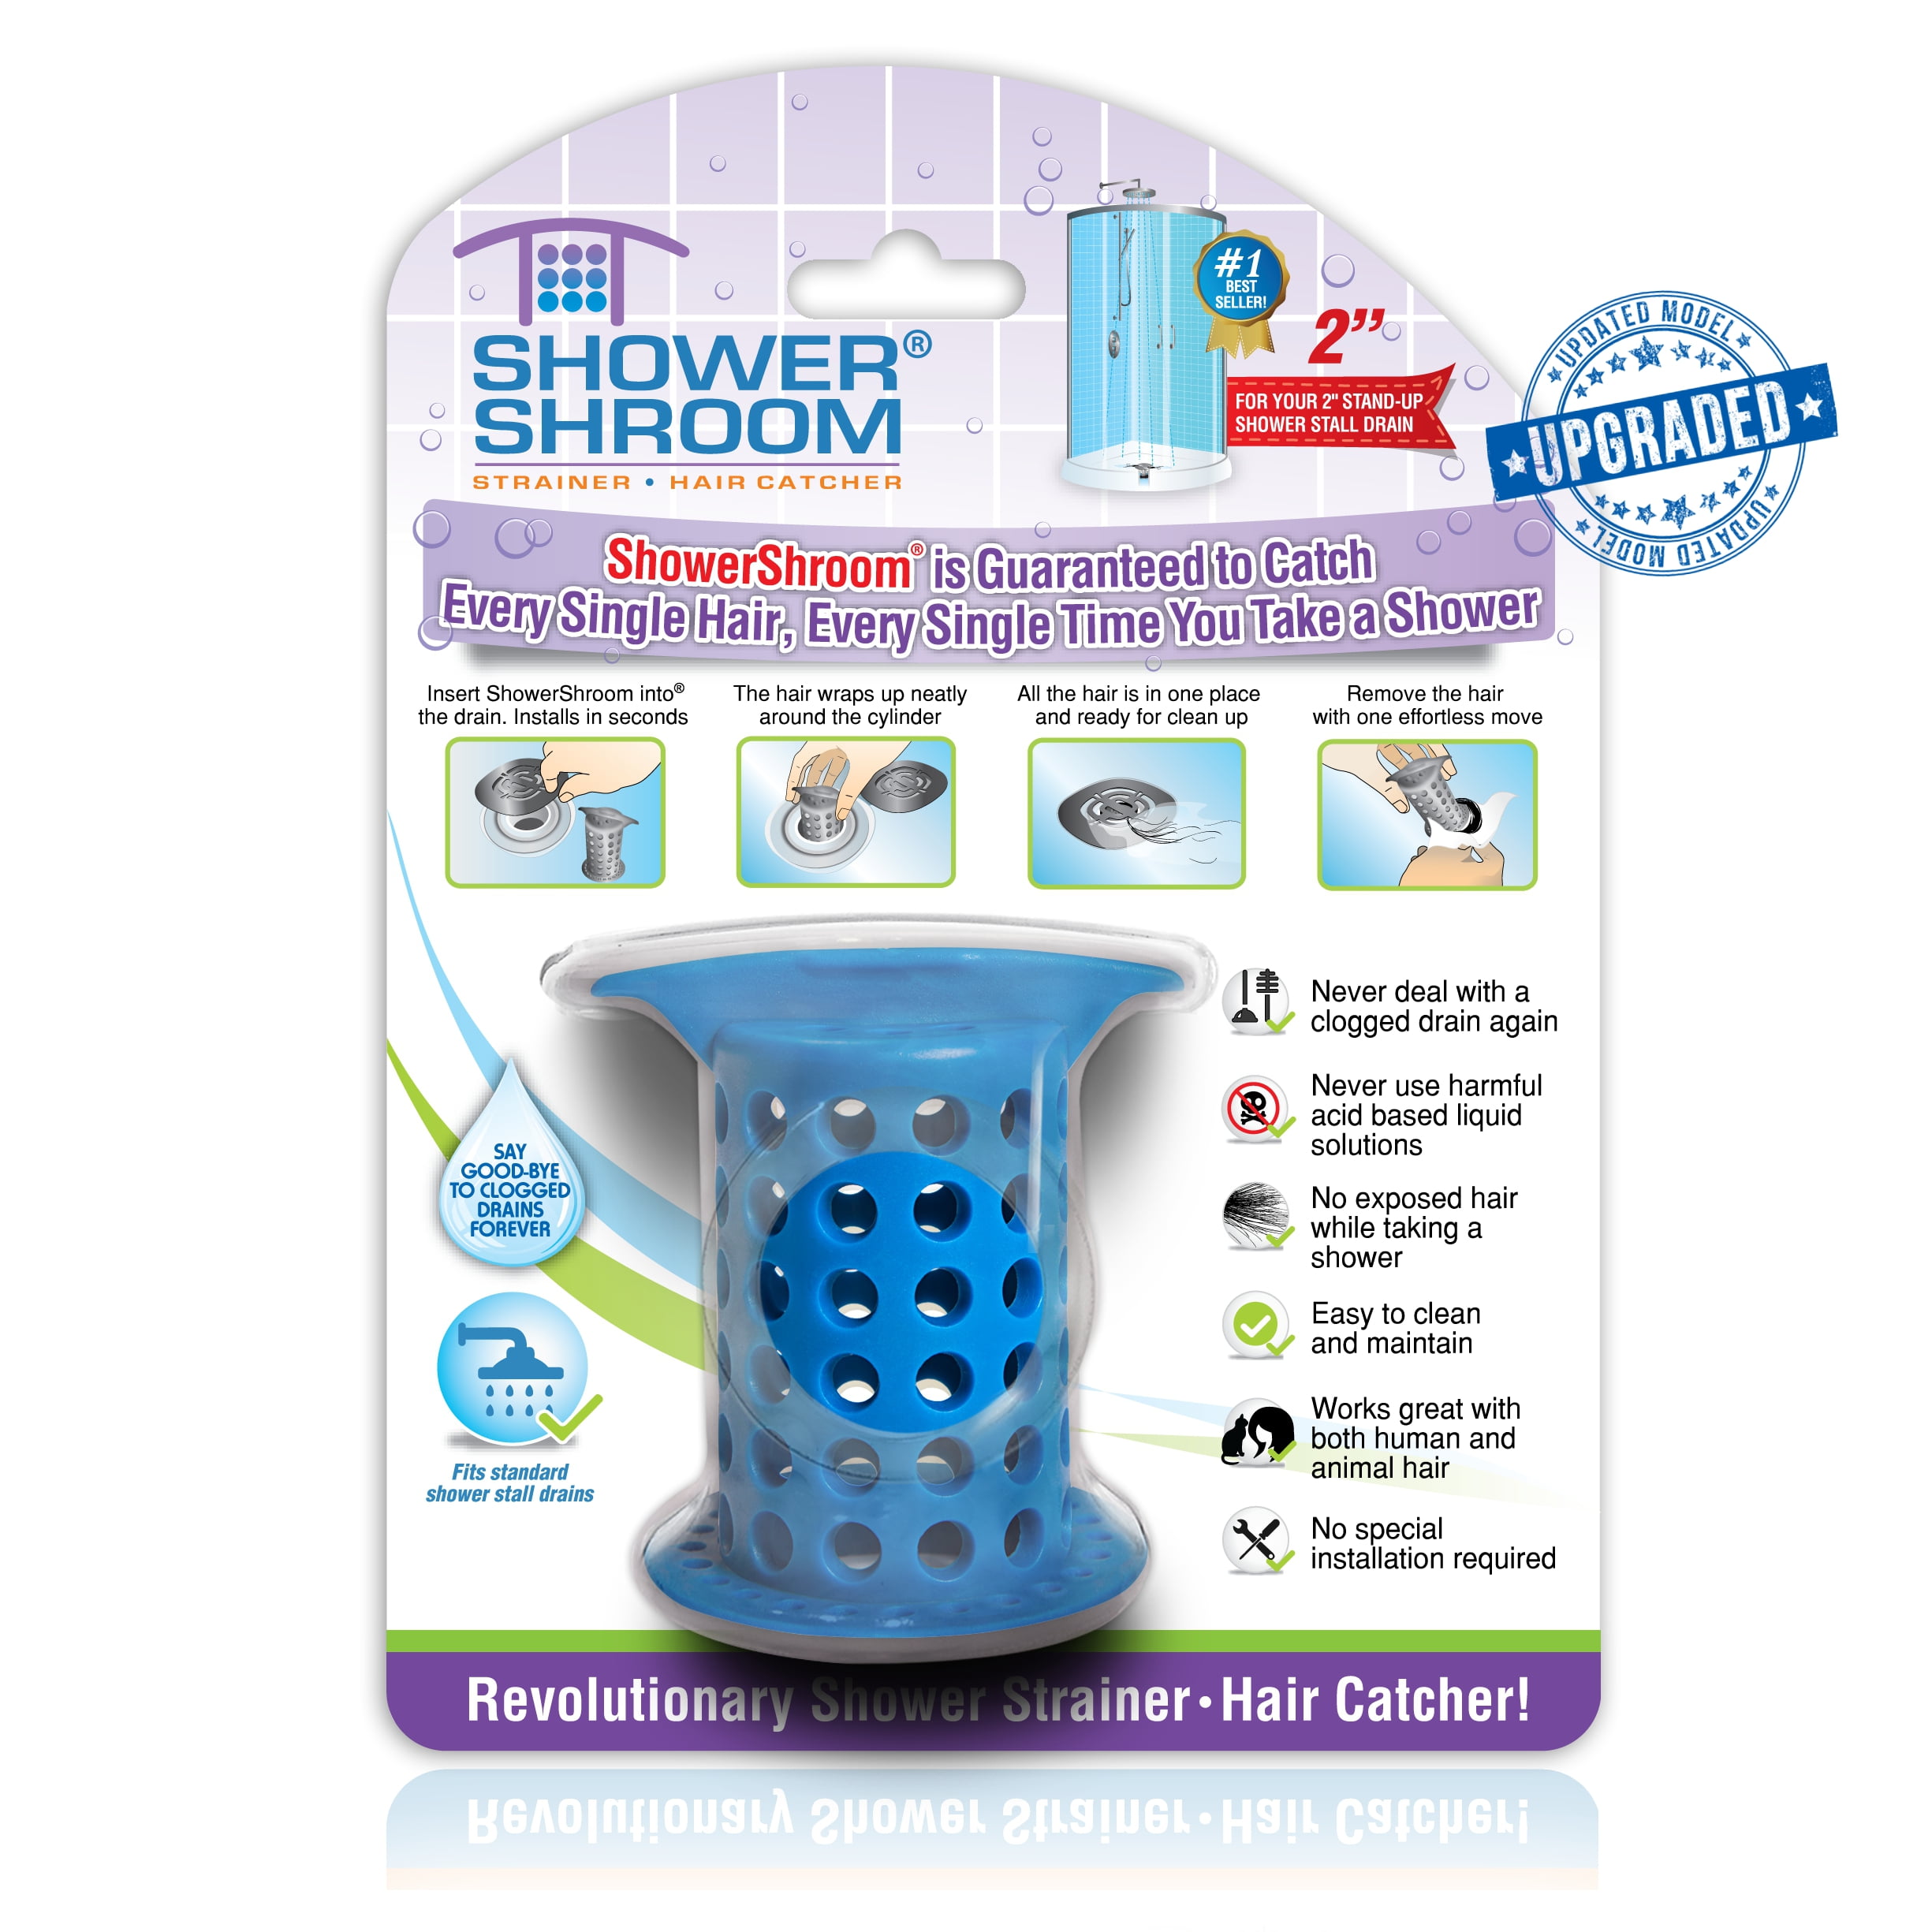 TubShroom The Revolutionary Tub Drain Protector Hair Catcher/Strainer/Snare,Blue 